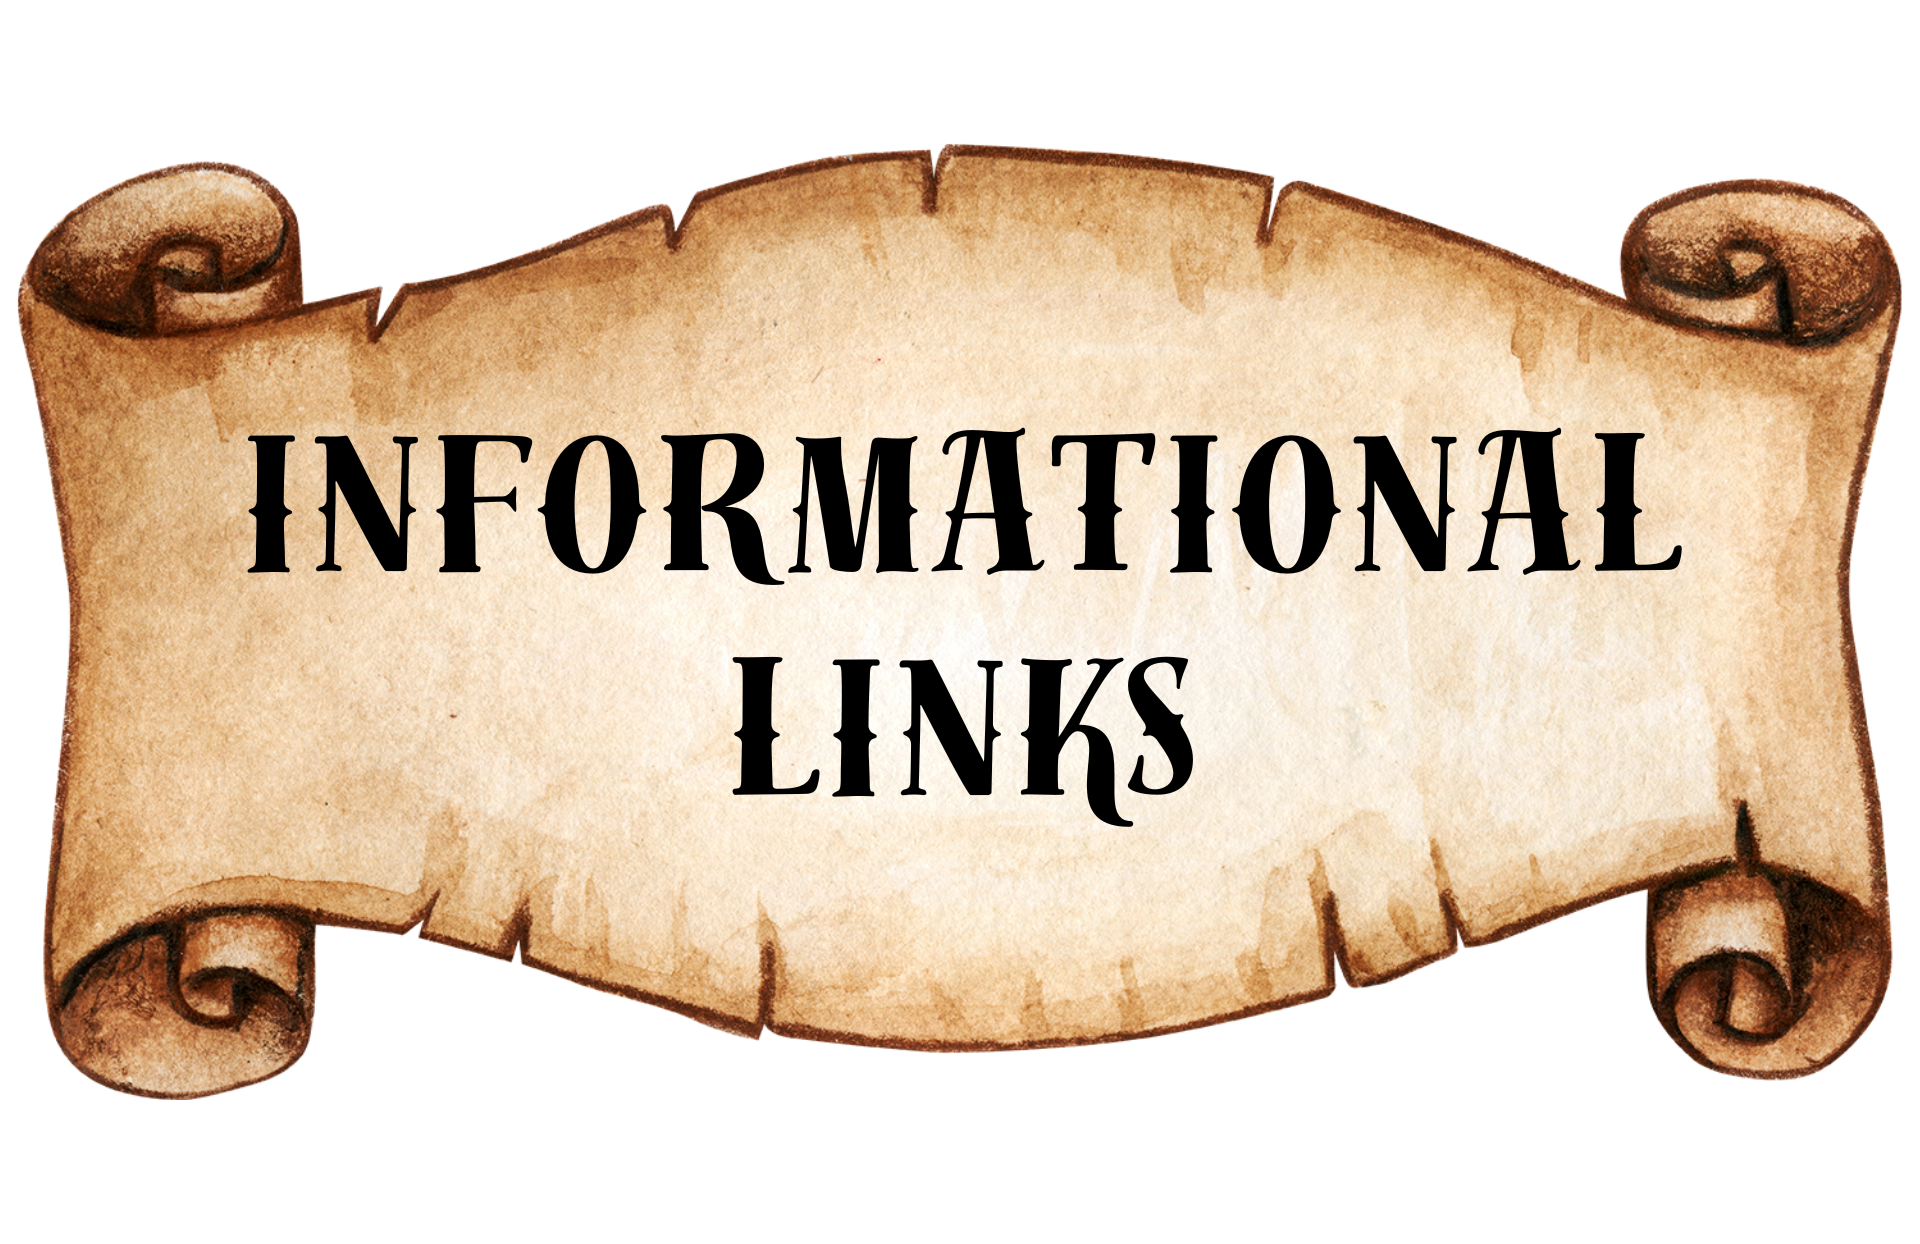 a scroll that says informational links on it